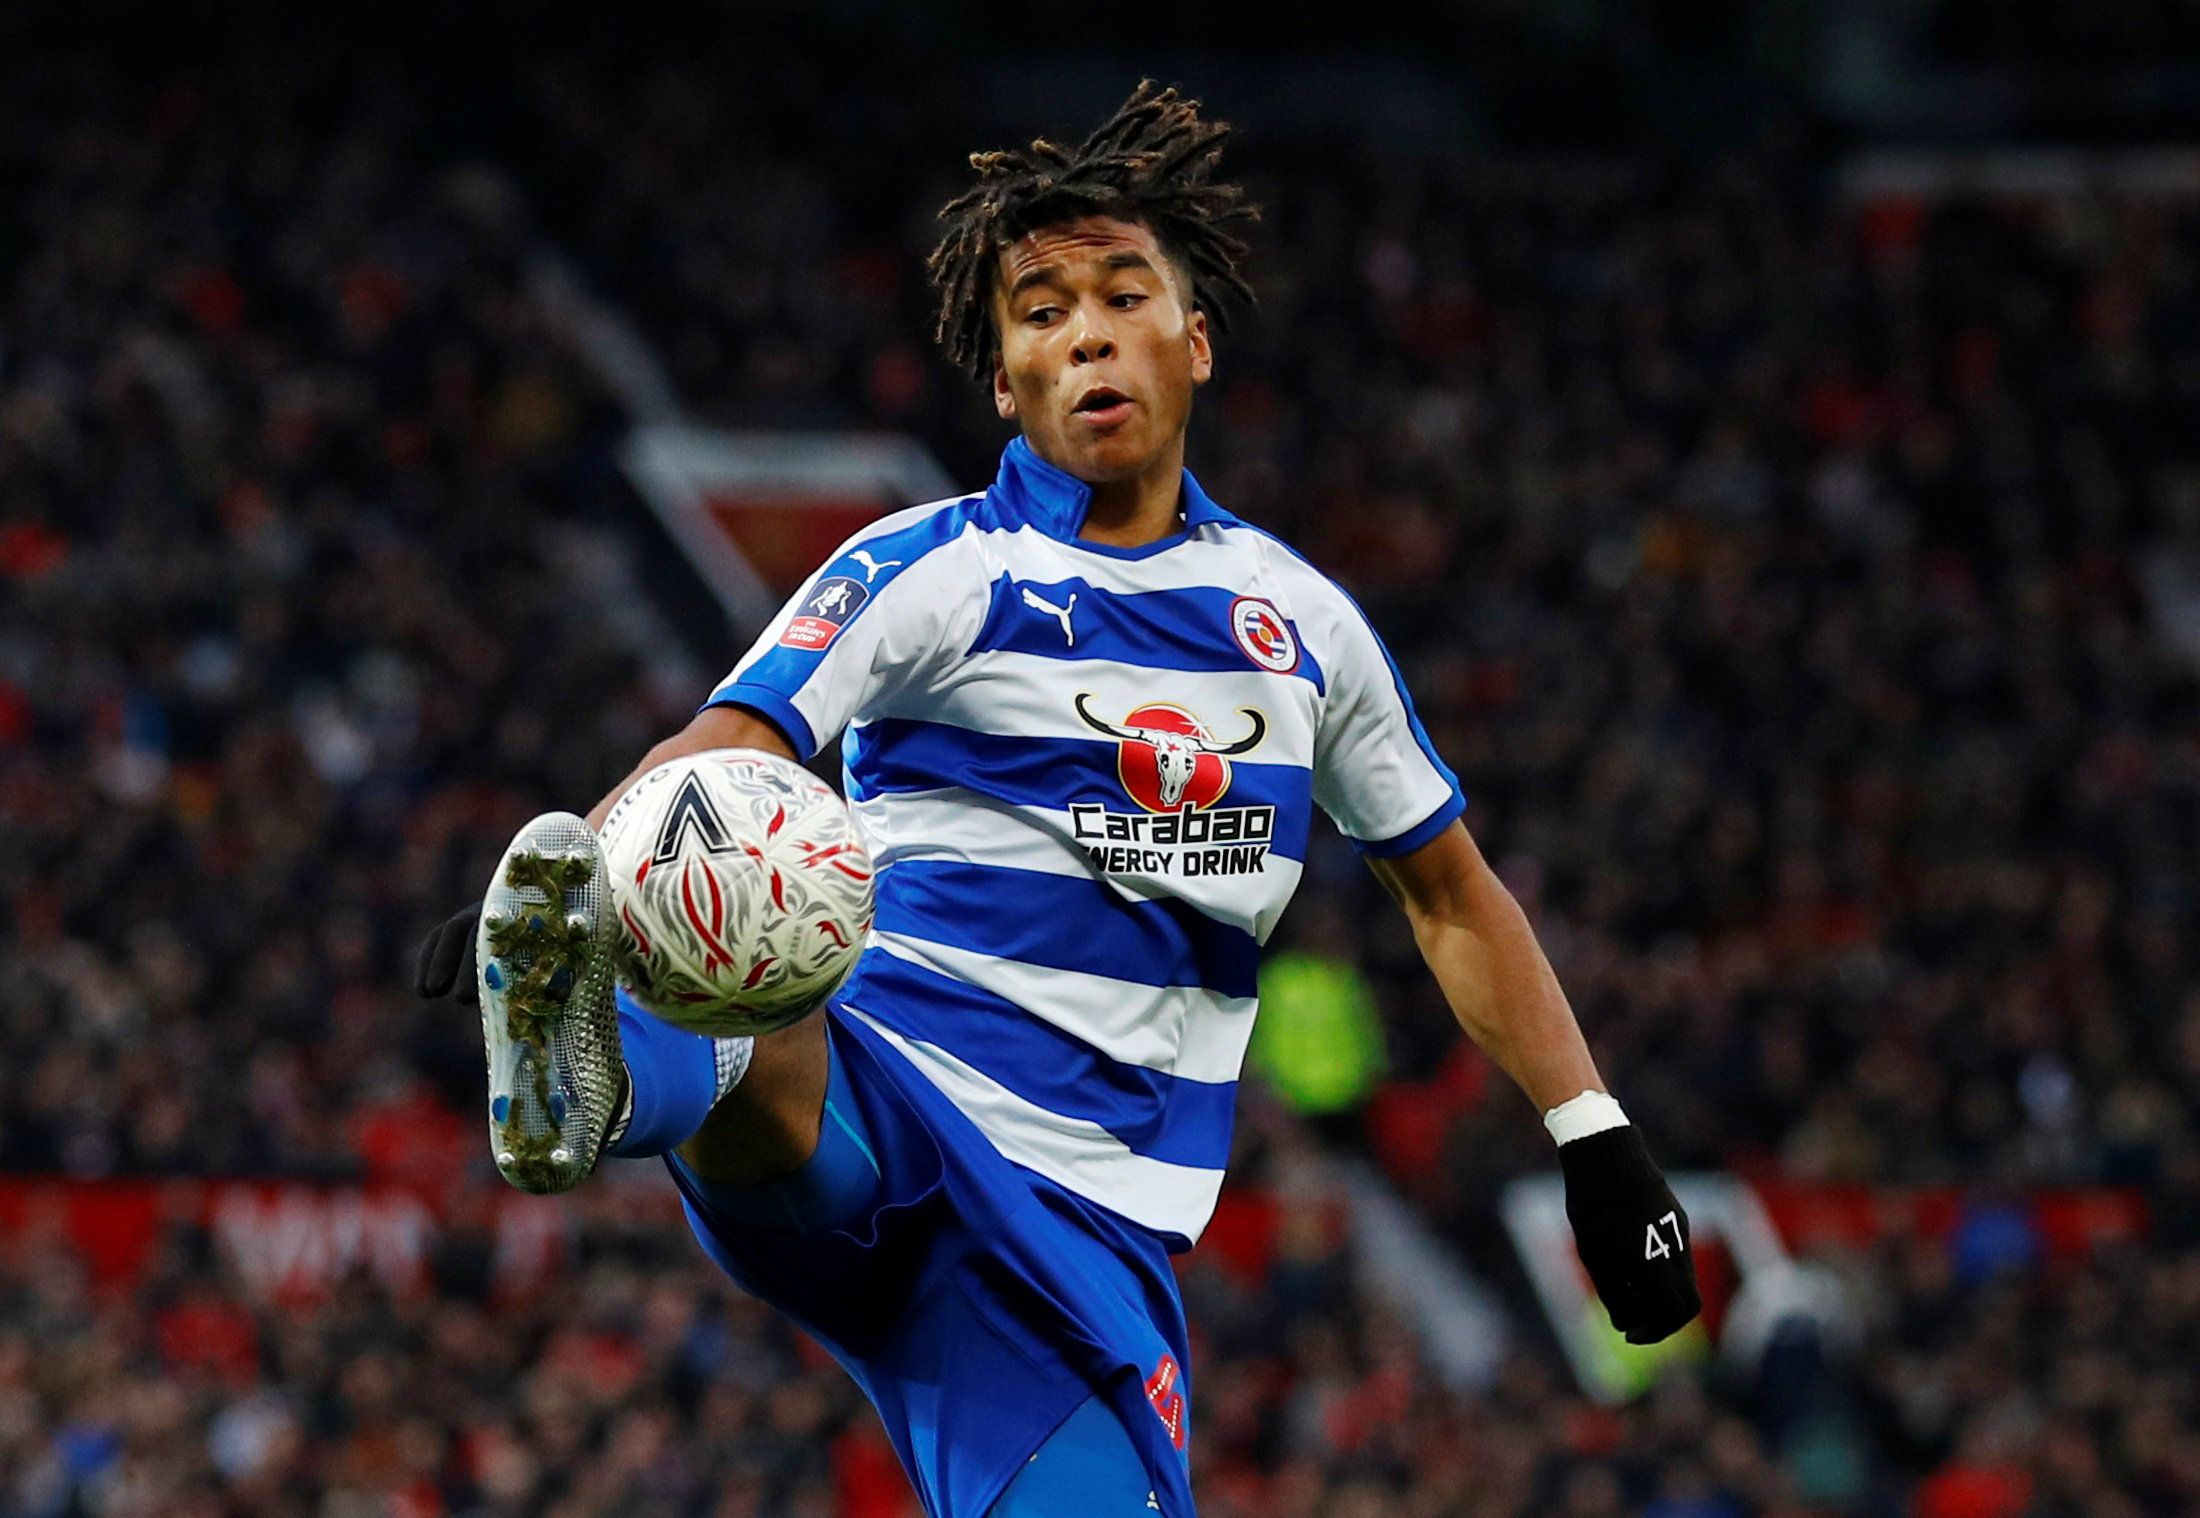 Soccer Football - FA Cup Third Round - Manchester United v Reading - Old Trafford, Manchester, Britain - January 5, 2019  Reading's Danny Loader in action  REUTERS/Phil Noble